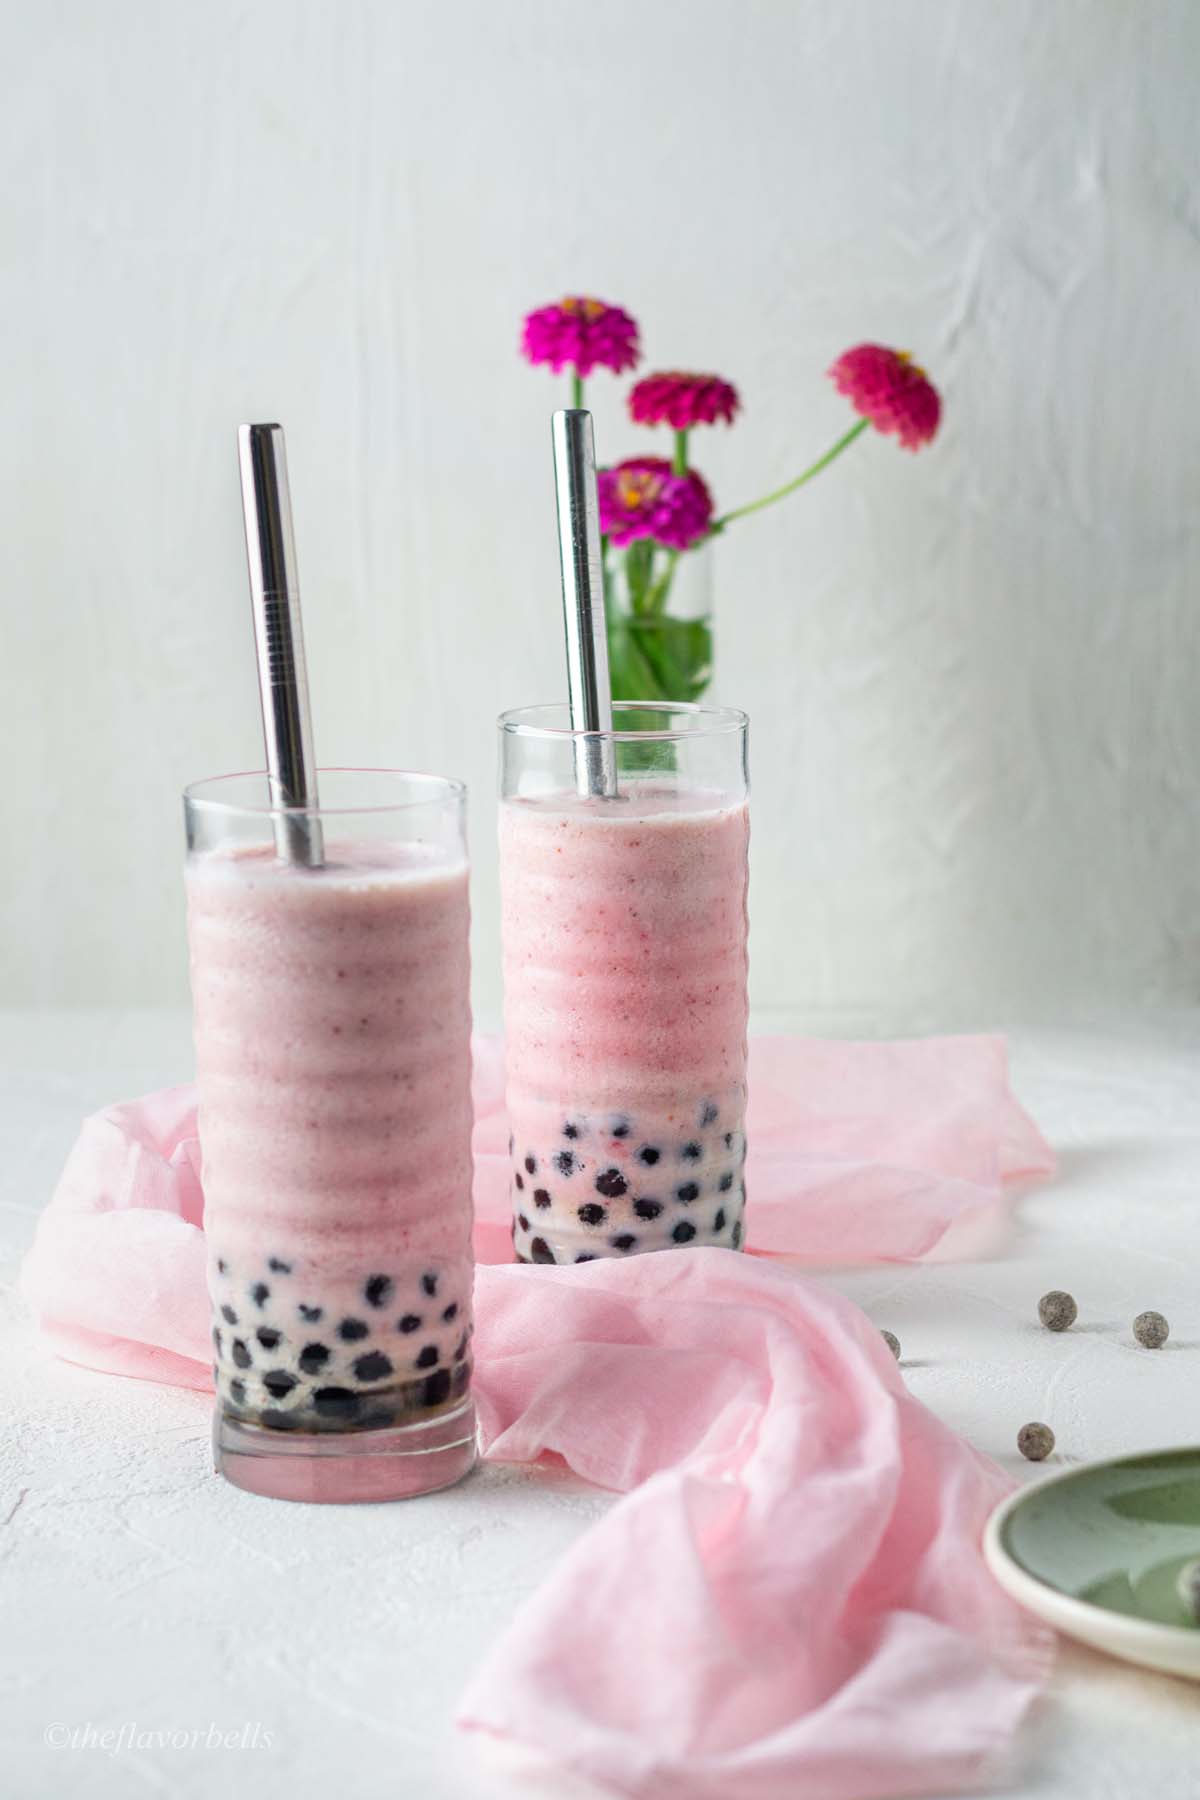 perfectly pink strawberry smoothy filled in curvy large glasses and at the base black tapioca pearls are showing themselves